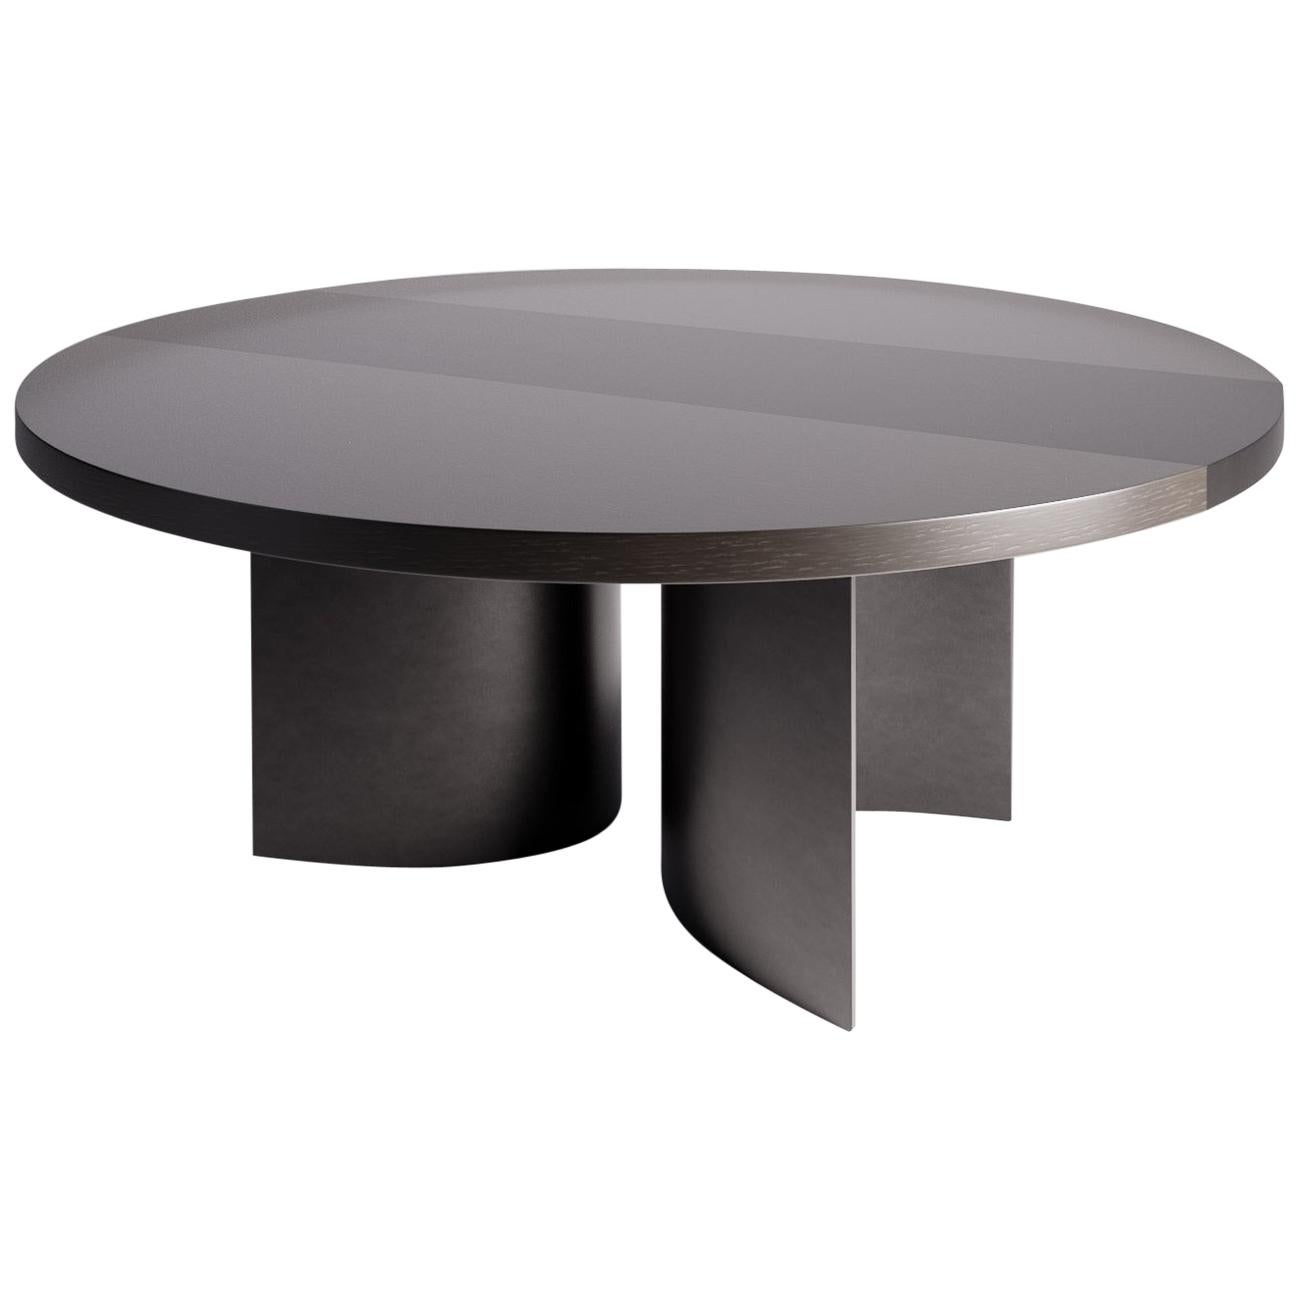 LUMA Design Workshop Silo Round Dining Table Dark Brown Wood and Nickel Metal For Sale